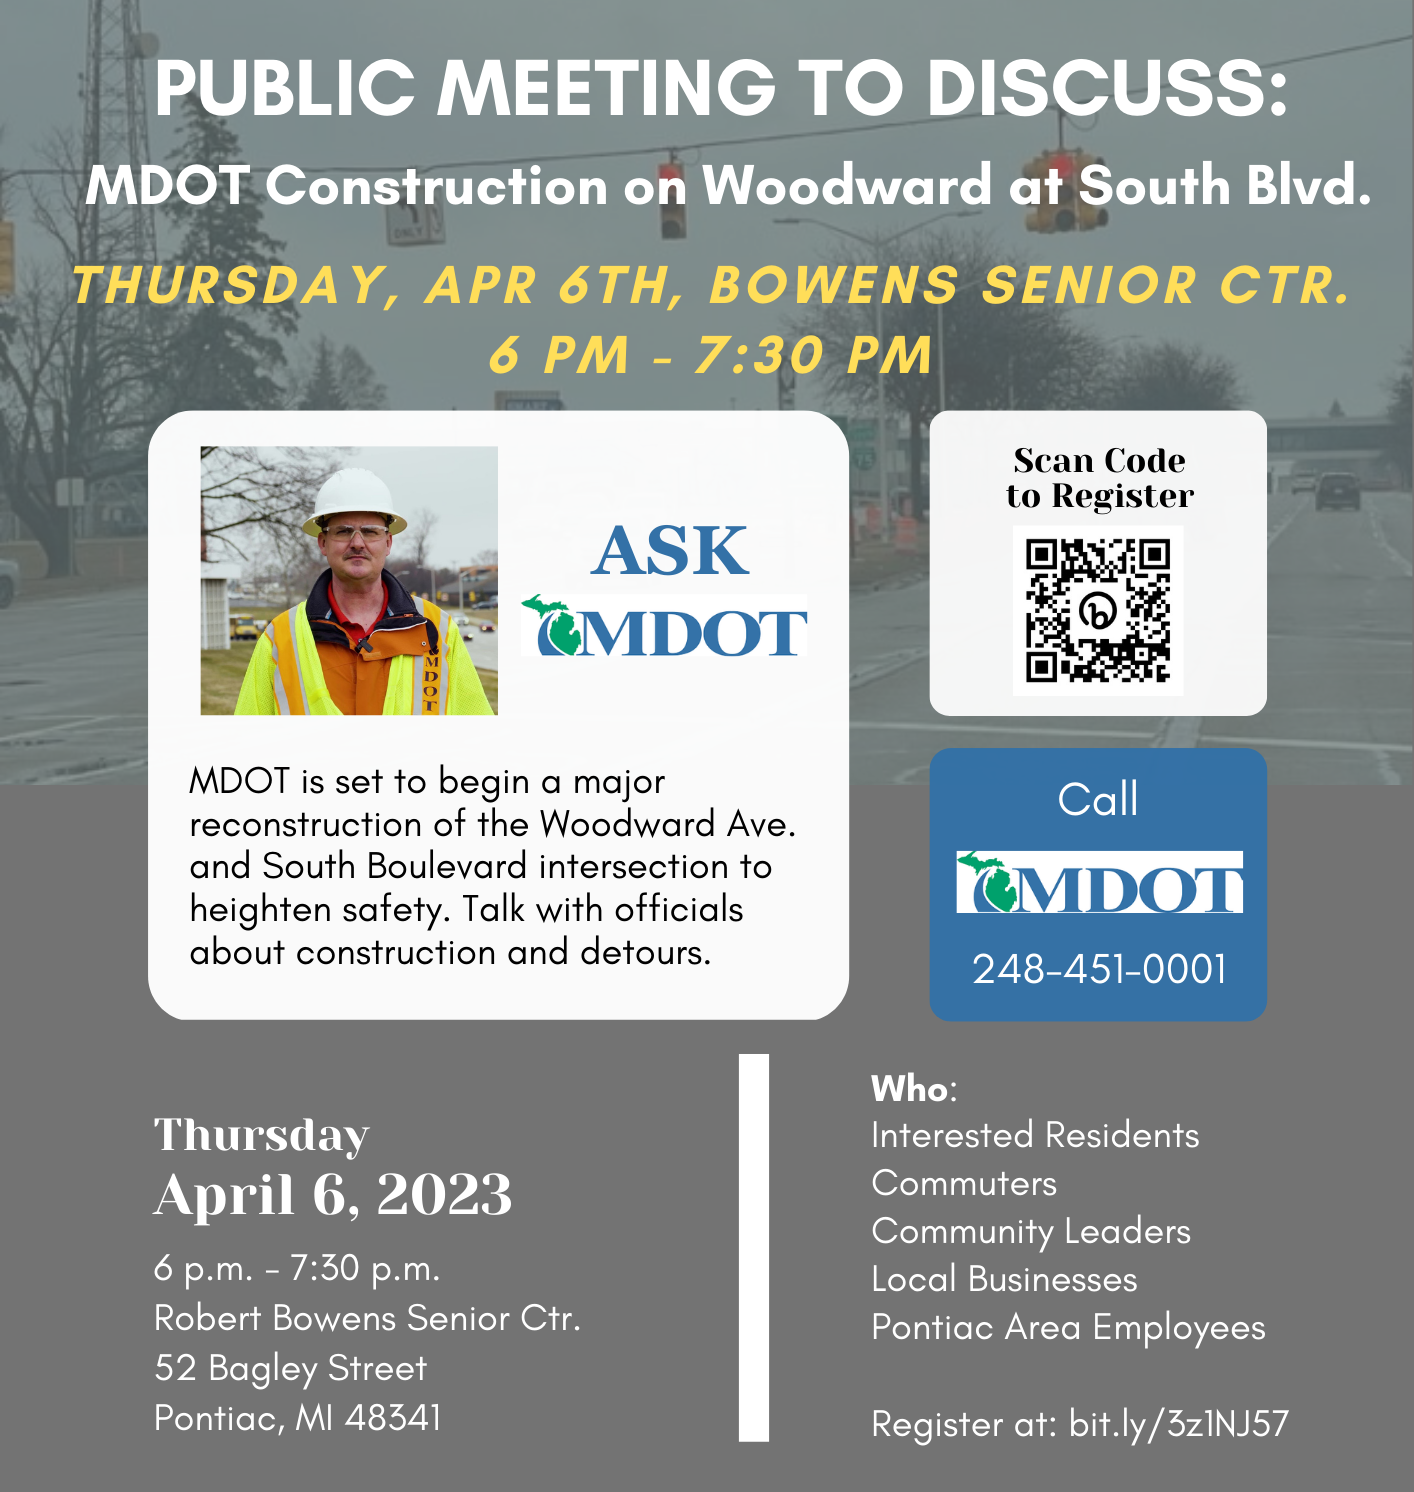 Public Meeting - April 6 to discuss MDOT Road Construction on Woodward at South Blvd. cropped